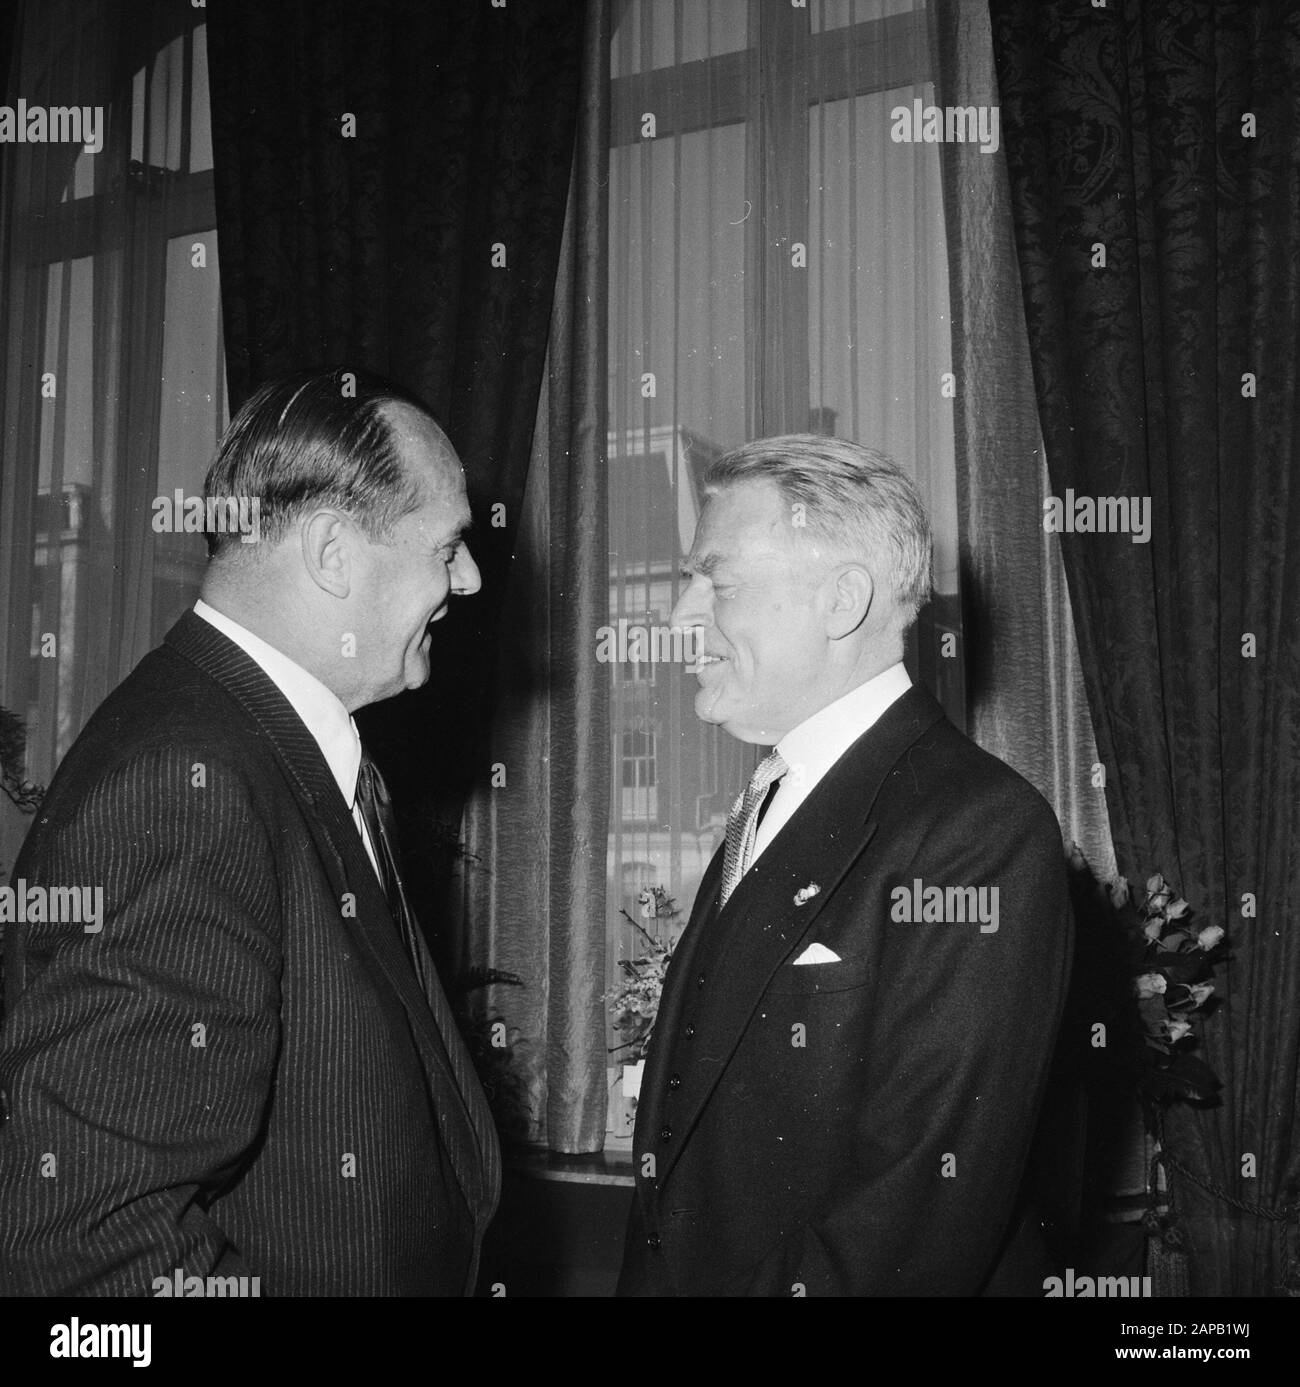 Farewell reception of dr. M. W. Holtrop, director of the Dutch Bank, at the Amstelhotel, mr. P. Blaisse (left) came to say goodbye Date: 26 april 1967 Location: Amsterdam, Noord-Holland Keywords: directors, receptions Personal name: Blaisse, P., Holtrop, M.W. Institution name: Amstelhotel Stock Photo